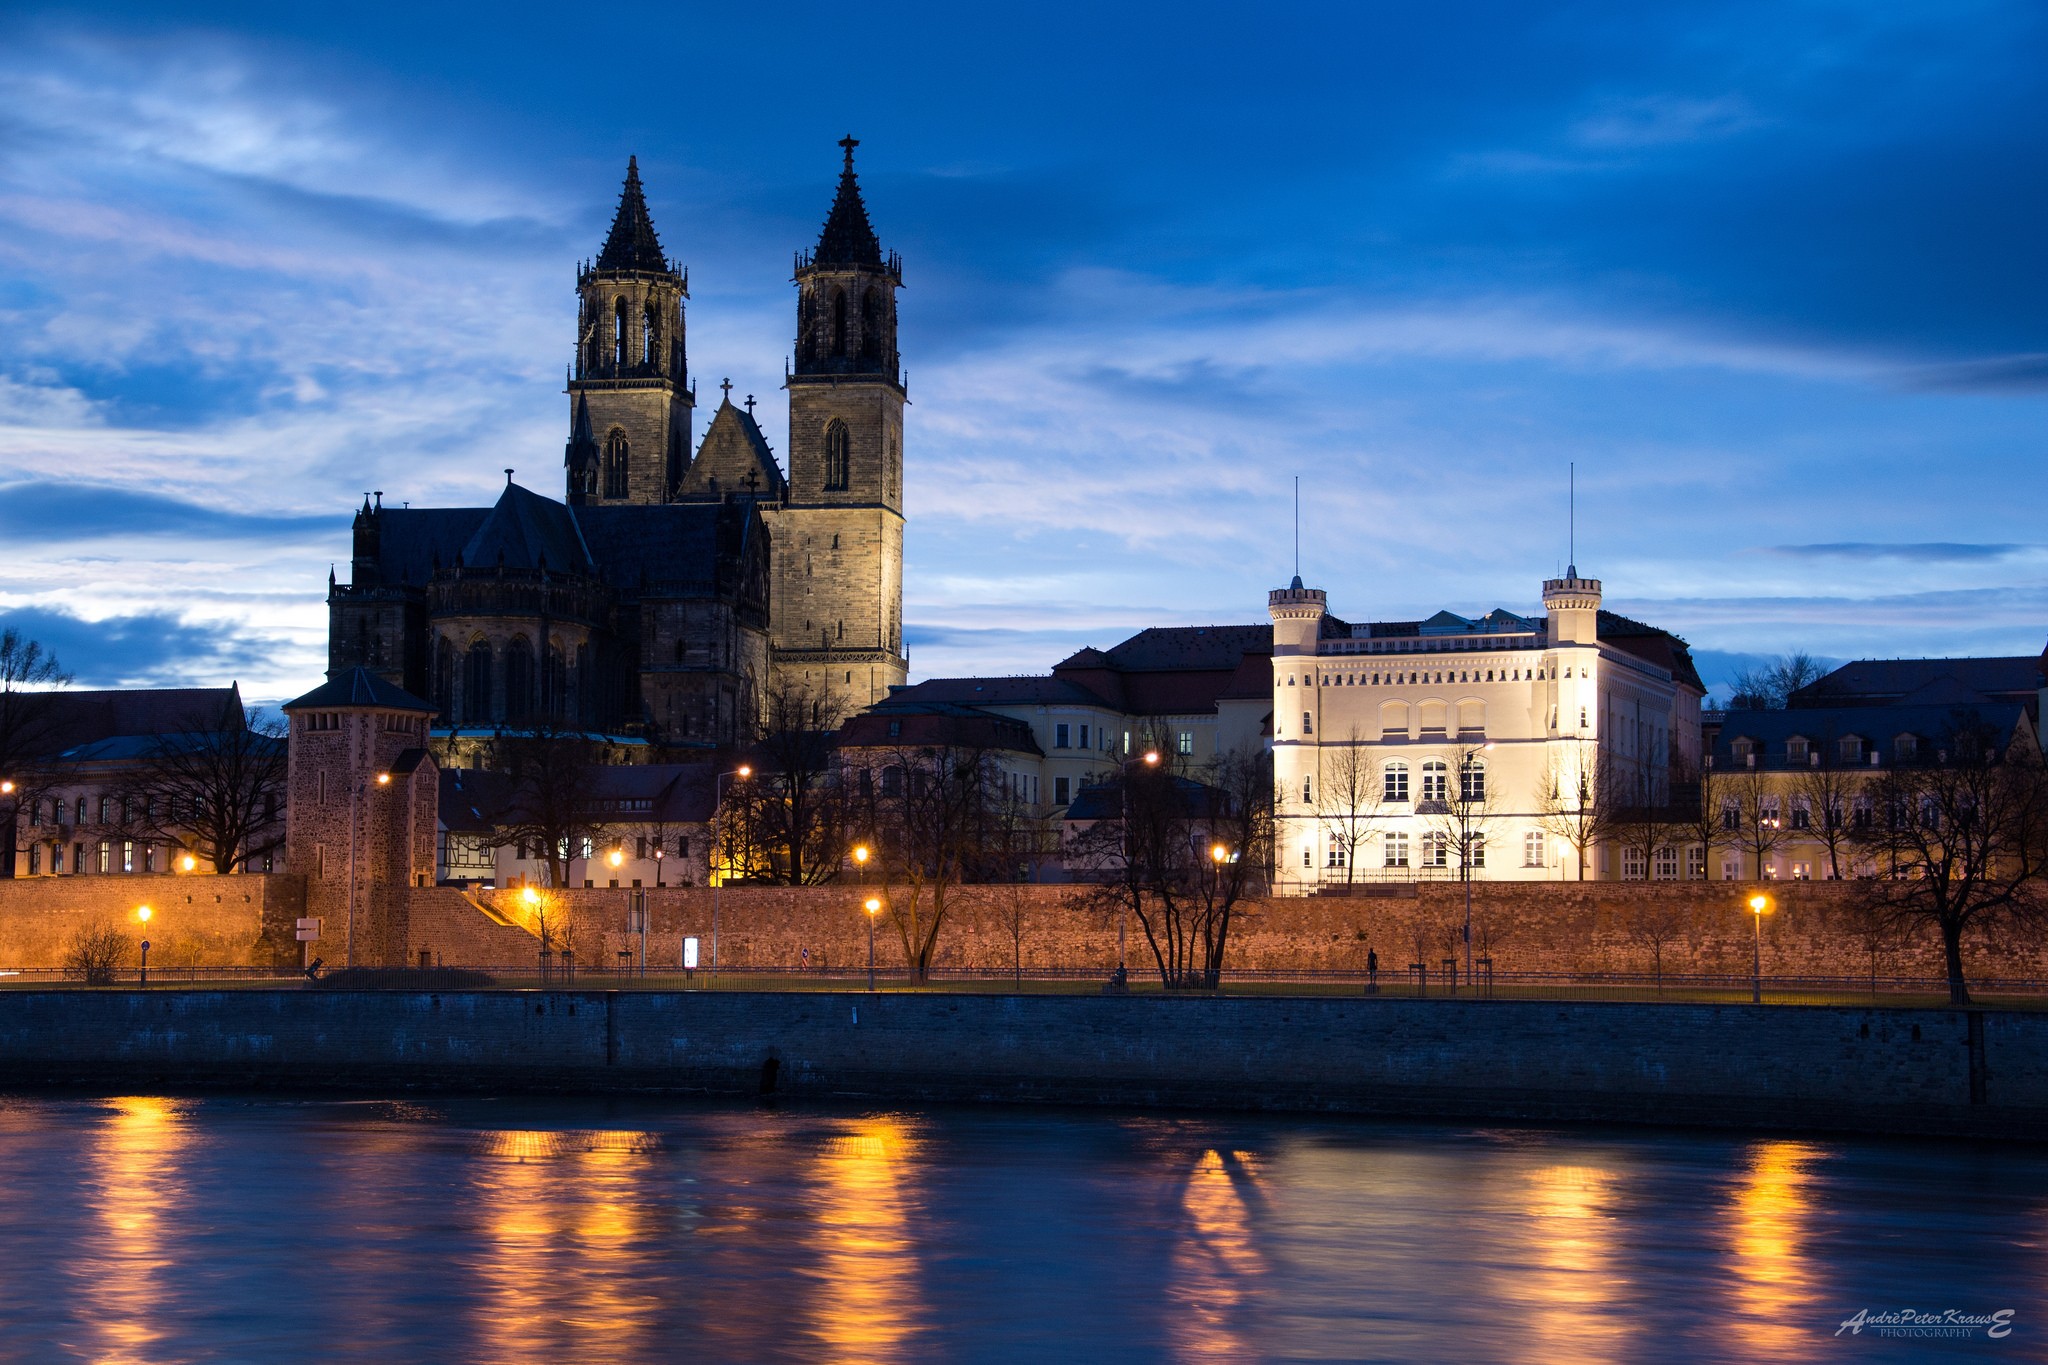 General 2048x1365 architecture cityscape building old building castle clouds lights Germany cathedral evening river reflection Magdeburg watermarked low light